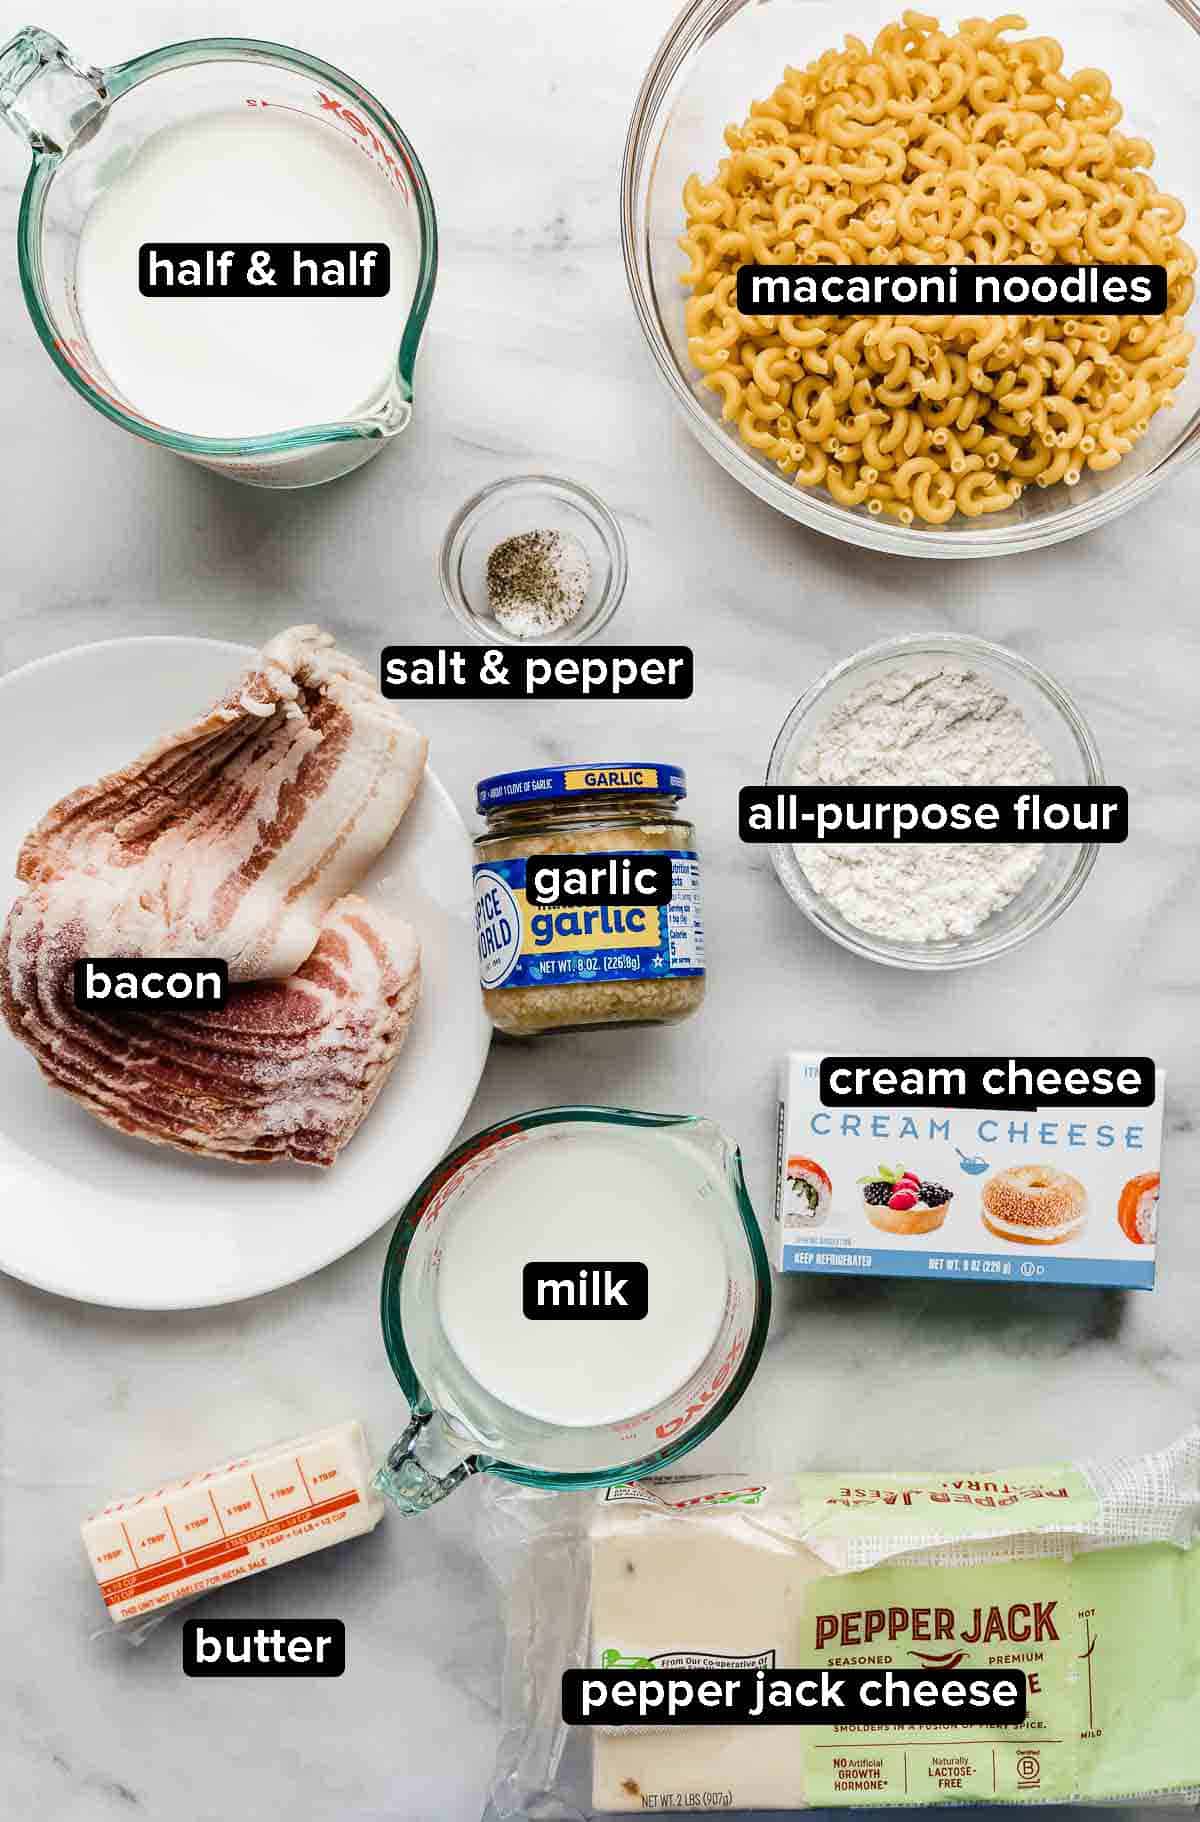 Pepper Jack Mac and Cheese ingredients portioned into glass bowls on a white background.